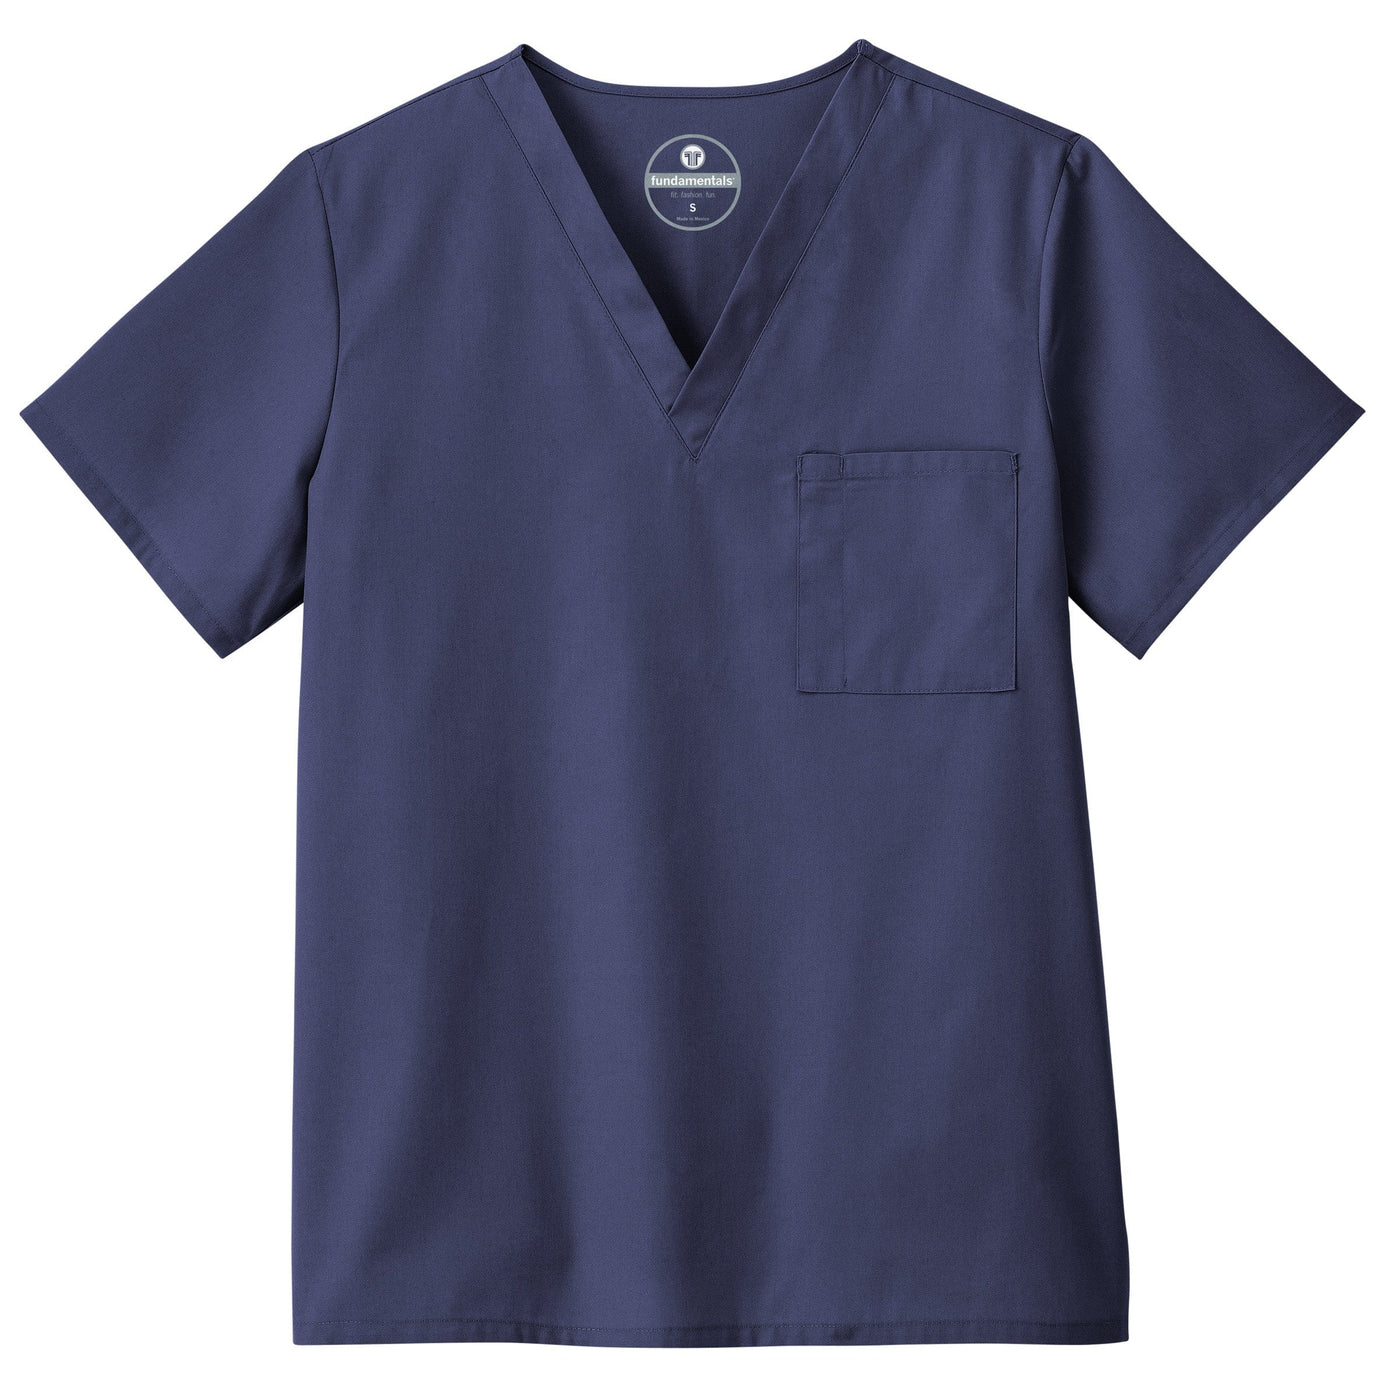 Fundamentals Unisex One Pocket Top Style: 14900 - Sophisticated Scrub Boutique